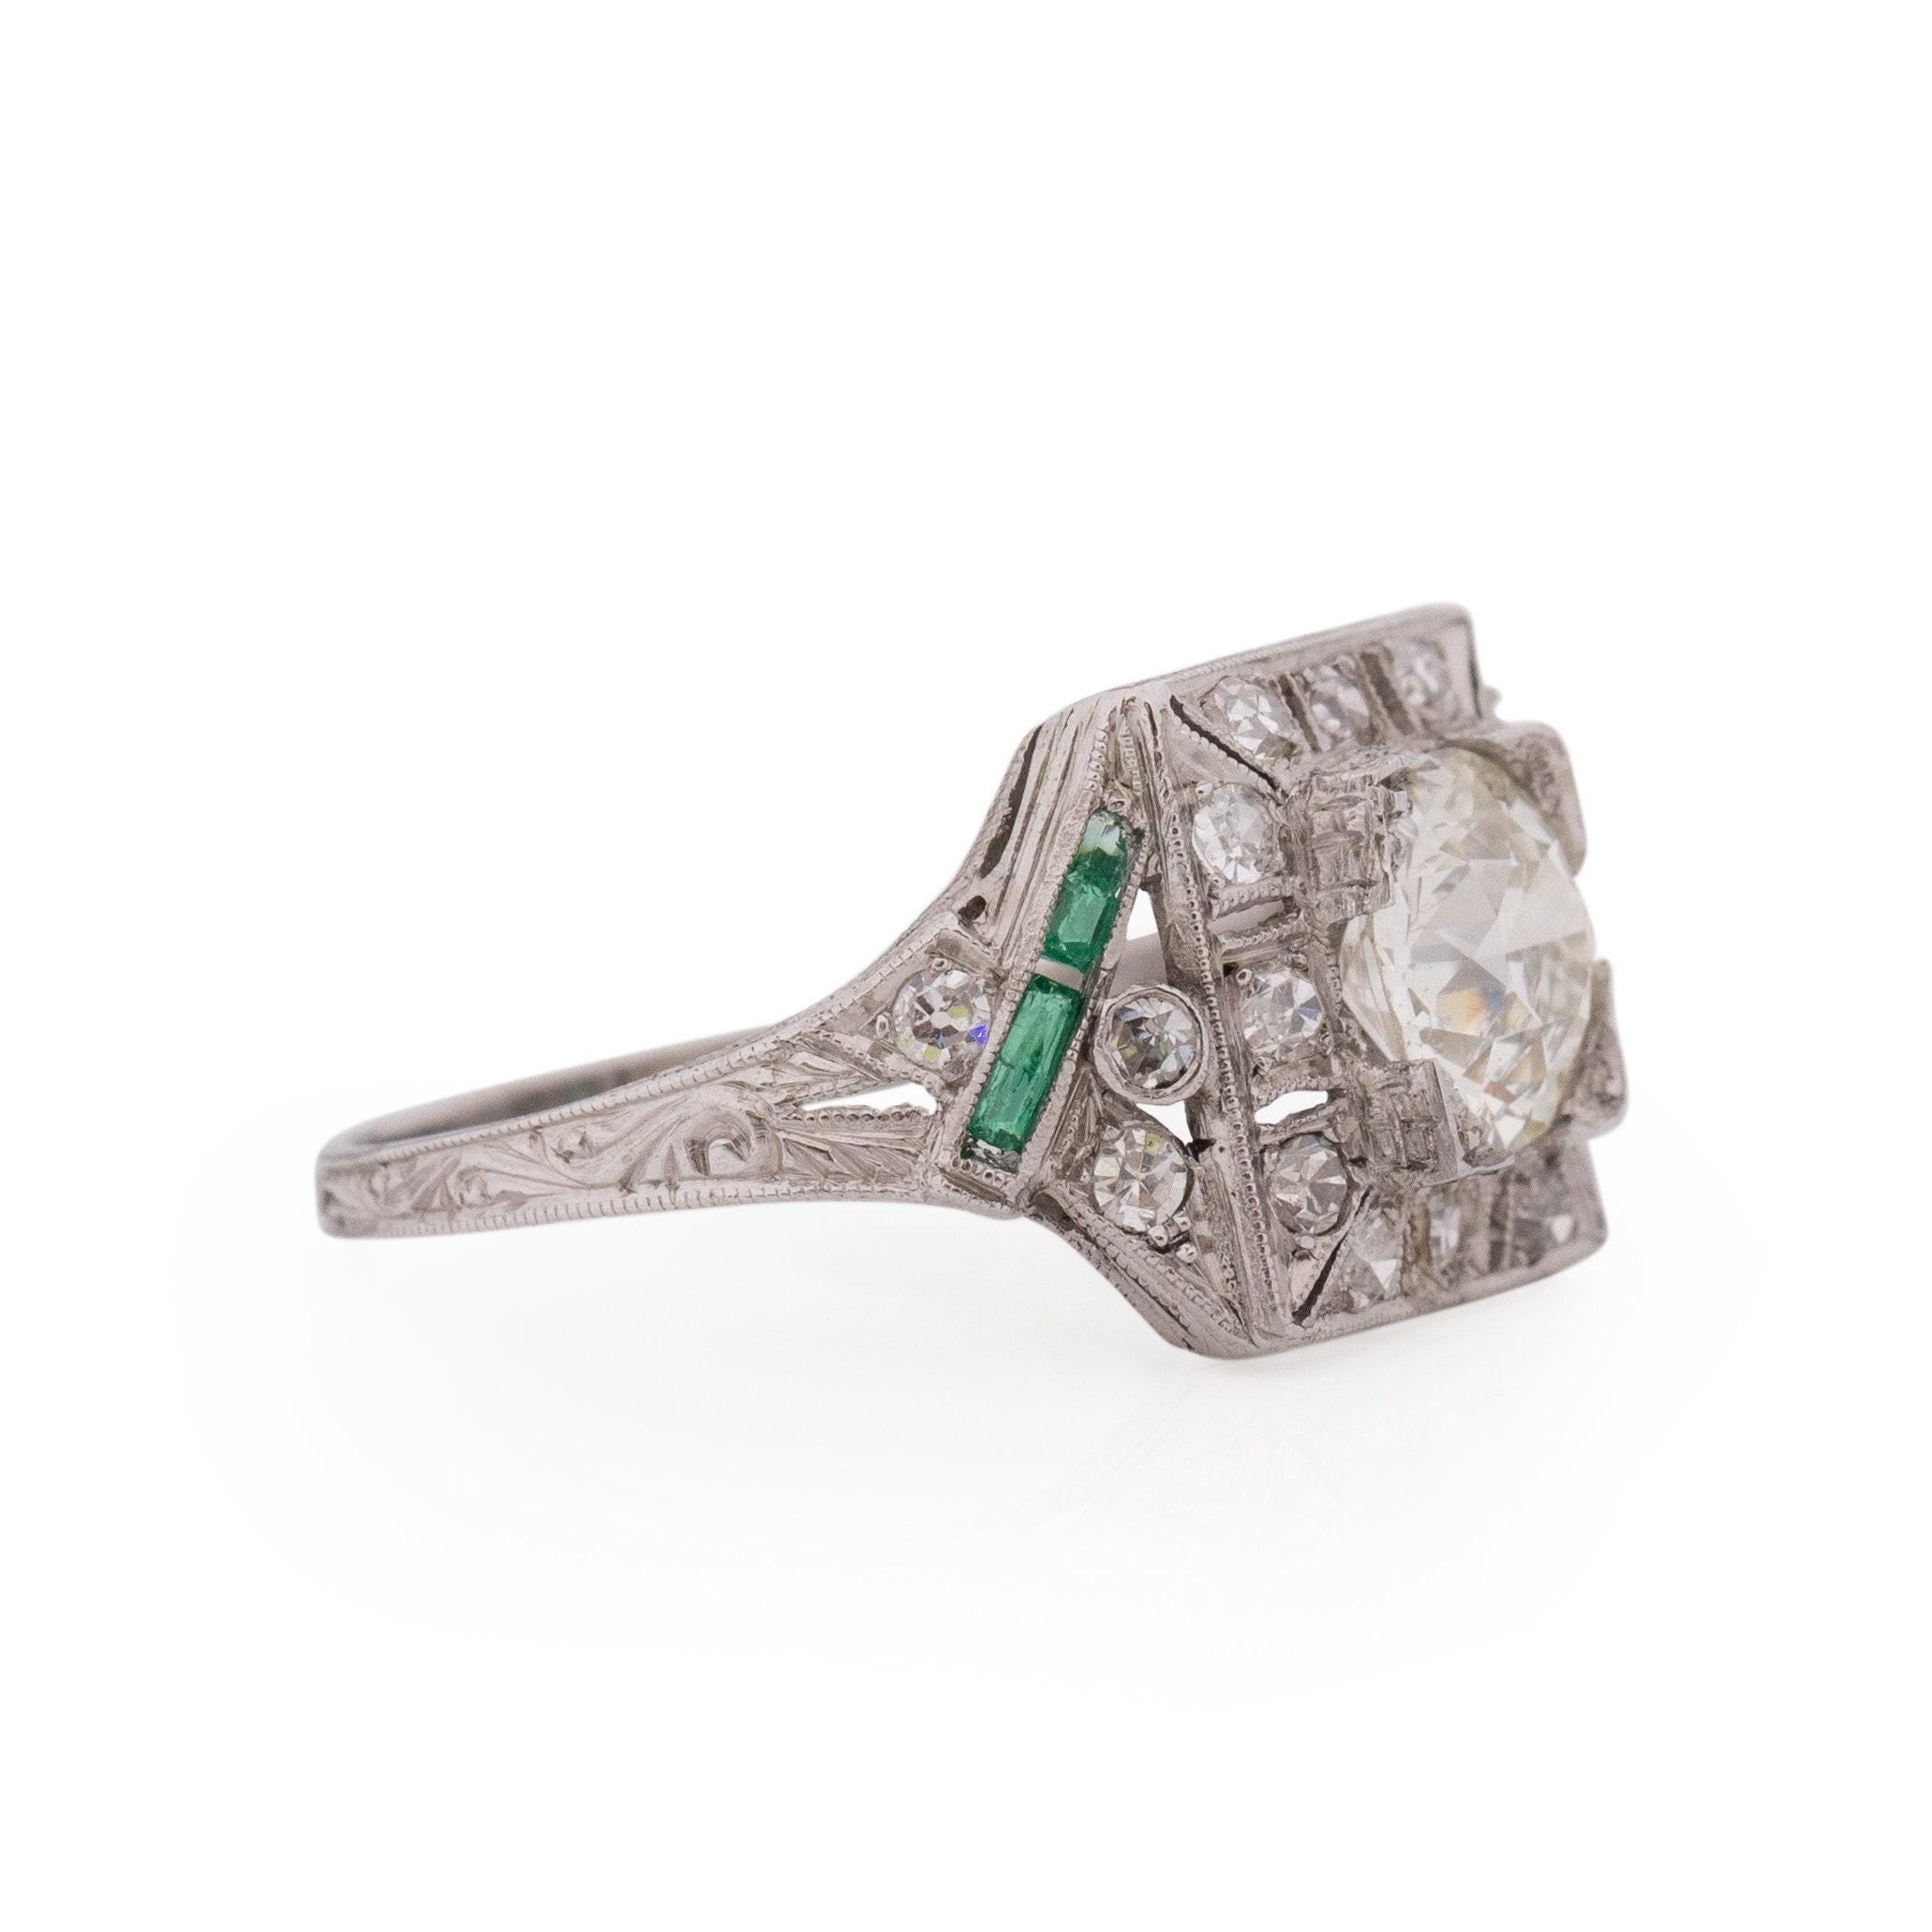 Old European Cut Circa 1920's Art Deco Platinum 1.26 Ct GIA Certified Diamond and Emerald Ring For Sale